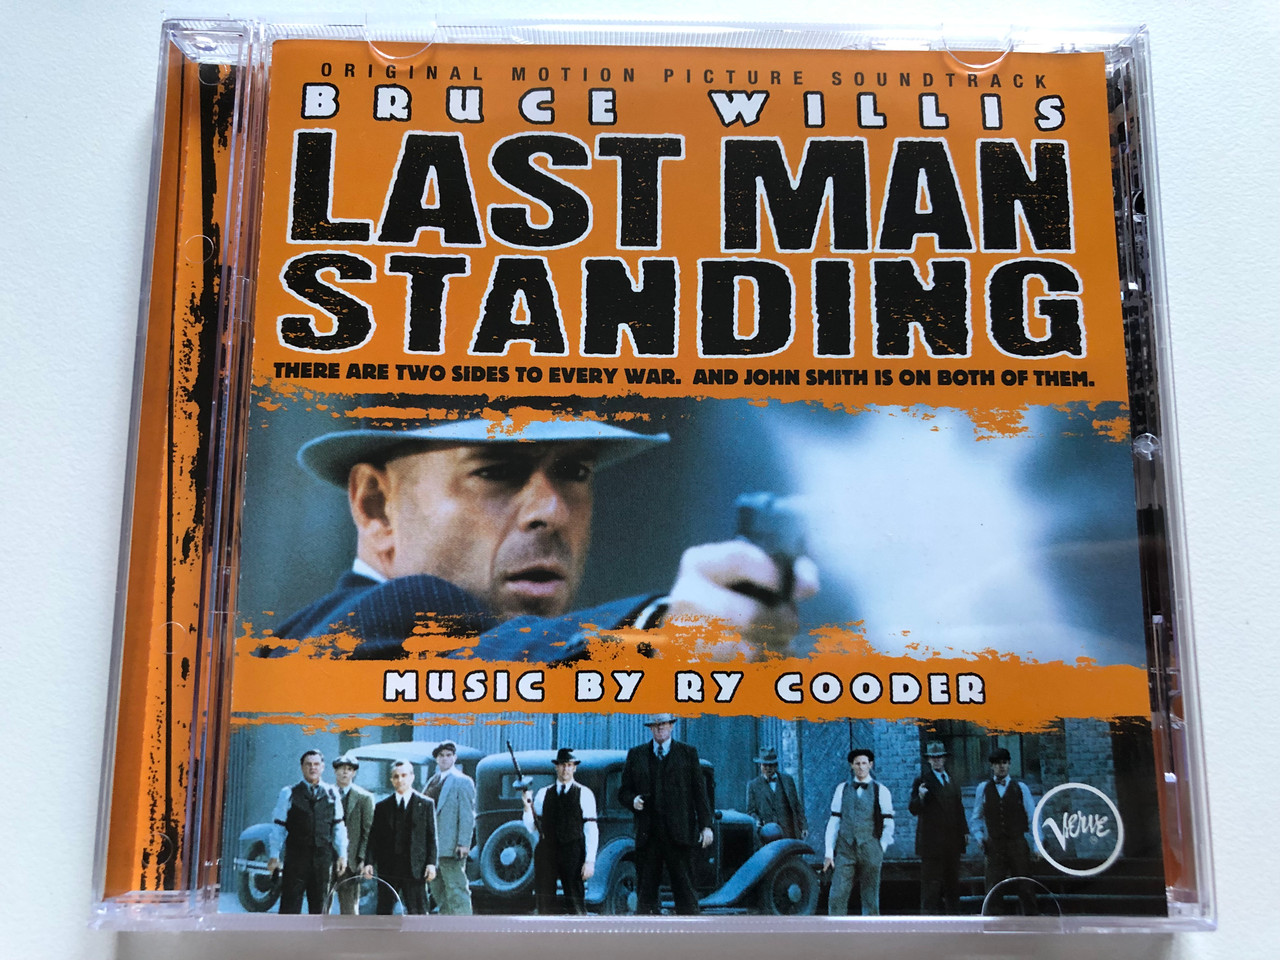 https://cdn10.bigcommerce.com/s-62bdpkt7pb/products/0/images/226434/Bruce_Willis_-_Last_Man_Standing_-_Music_By_Ry_Cooder_Original_Motion_Picture_Soundtrack_There_Are_Two_Sides_To_Every_War._And_John_Smith_Is_On_Both_Of_Them._Verve_Records_Audio_CD_1996_1__02863.1651570917.1280.1280.JPG?c=2&_gl=1*1ryffsj*_ga*MjA2NTIxMjE2MC4xNTkwNTEyNTMy*_ga_WS2VZYPC6G*MTY1MTU1ODAzOC4zODAuMS4xNjUxNTcwNzA0LjM3